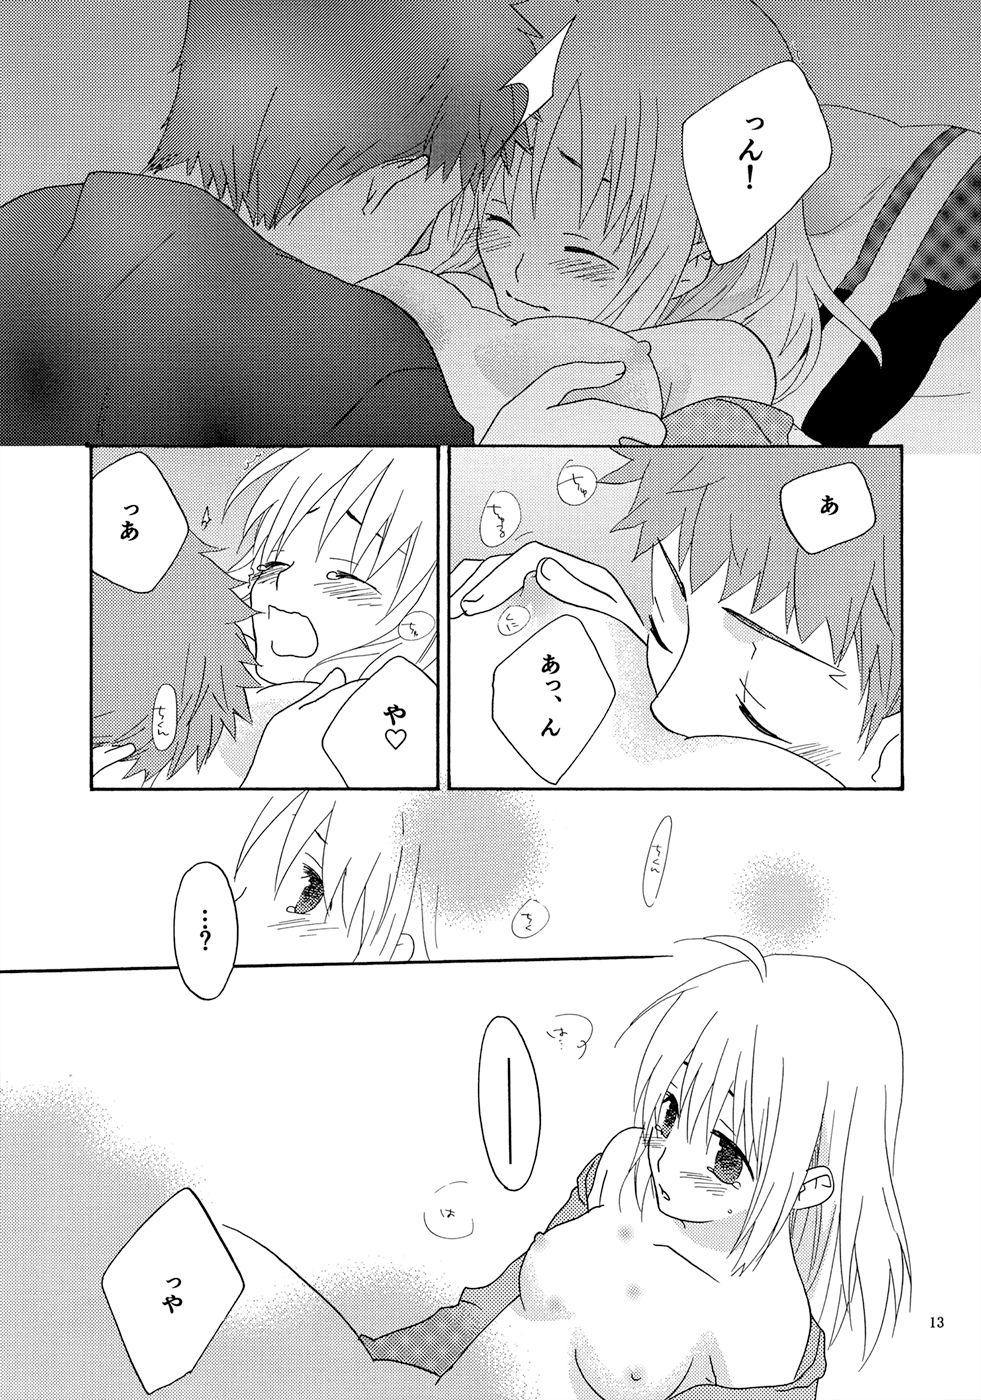 Fingers POP STAR - Fate stay night Realsex - Page 12